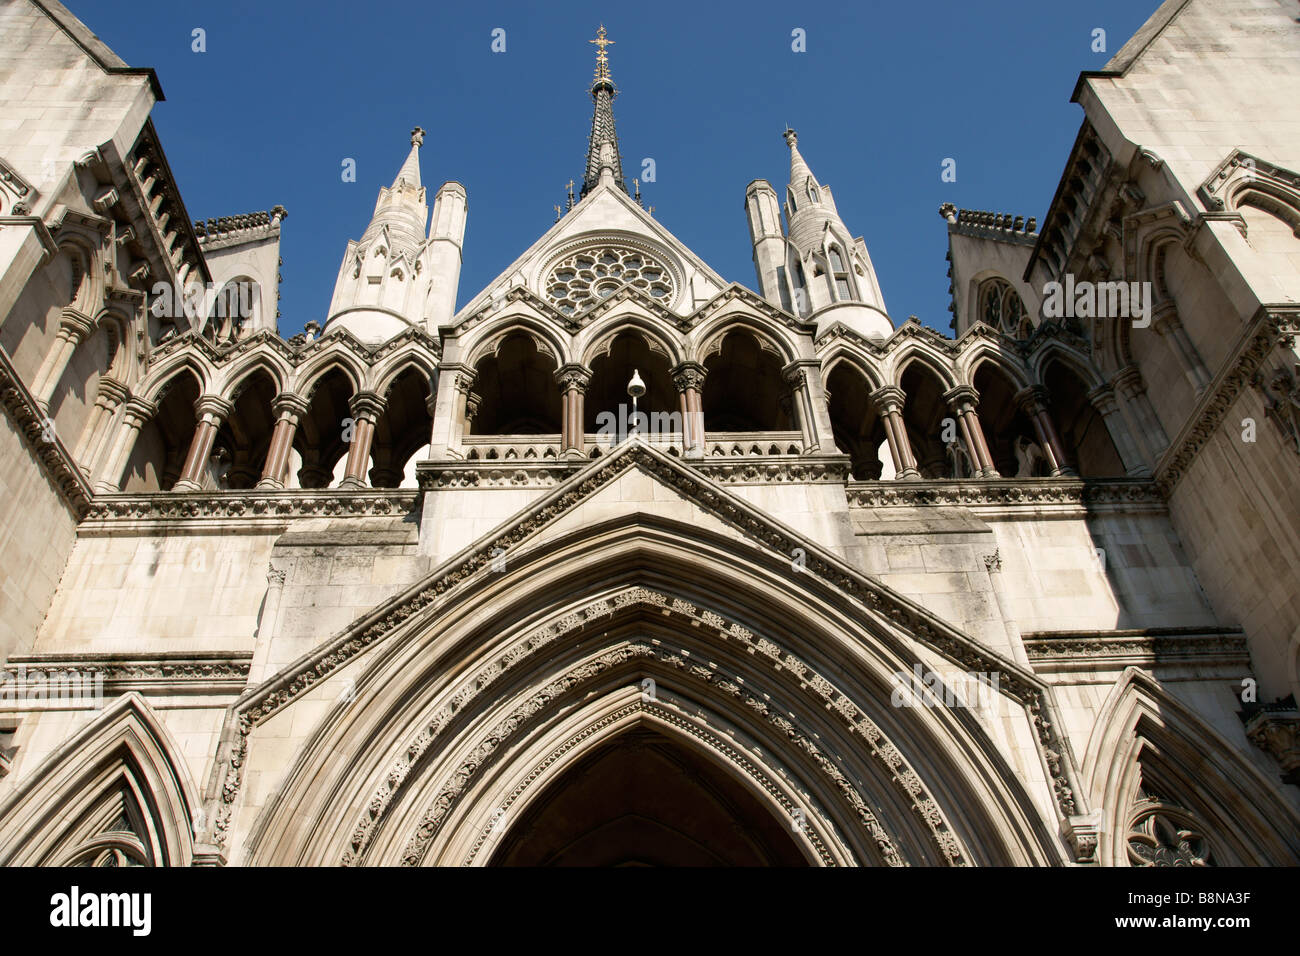 The exterior of the Royal Courts of law Chancery Lane Holborn London England UK (c) Marc Jackson Photography Stock Photo